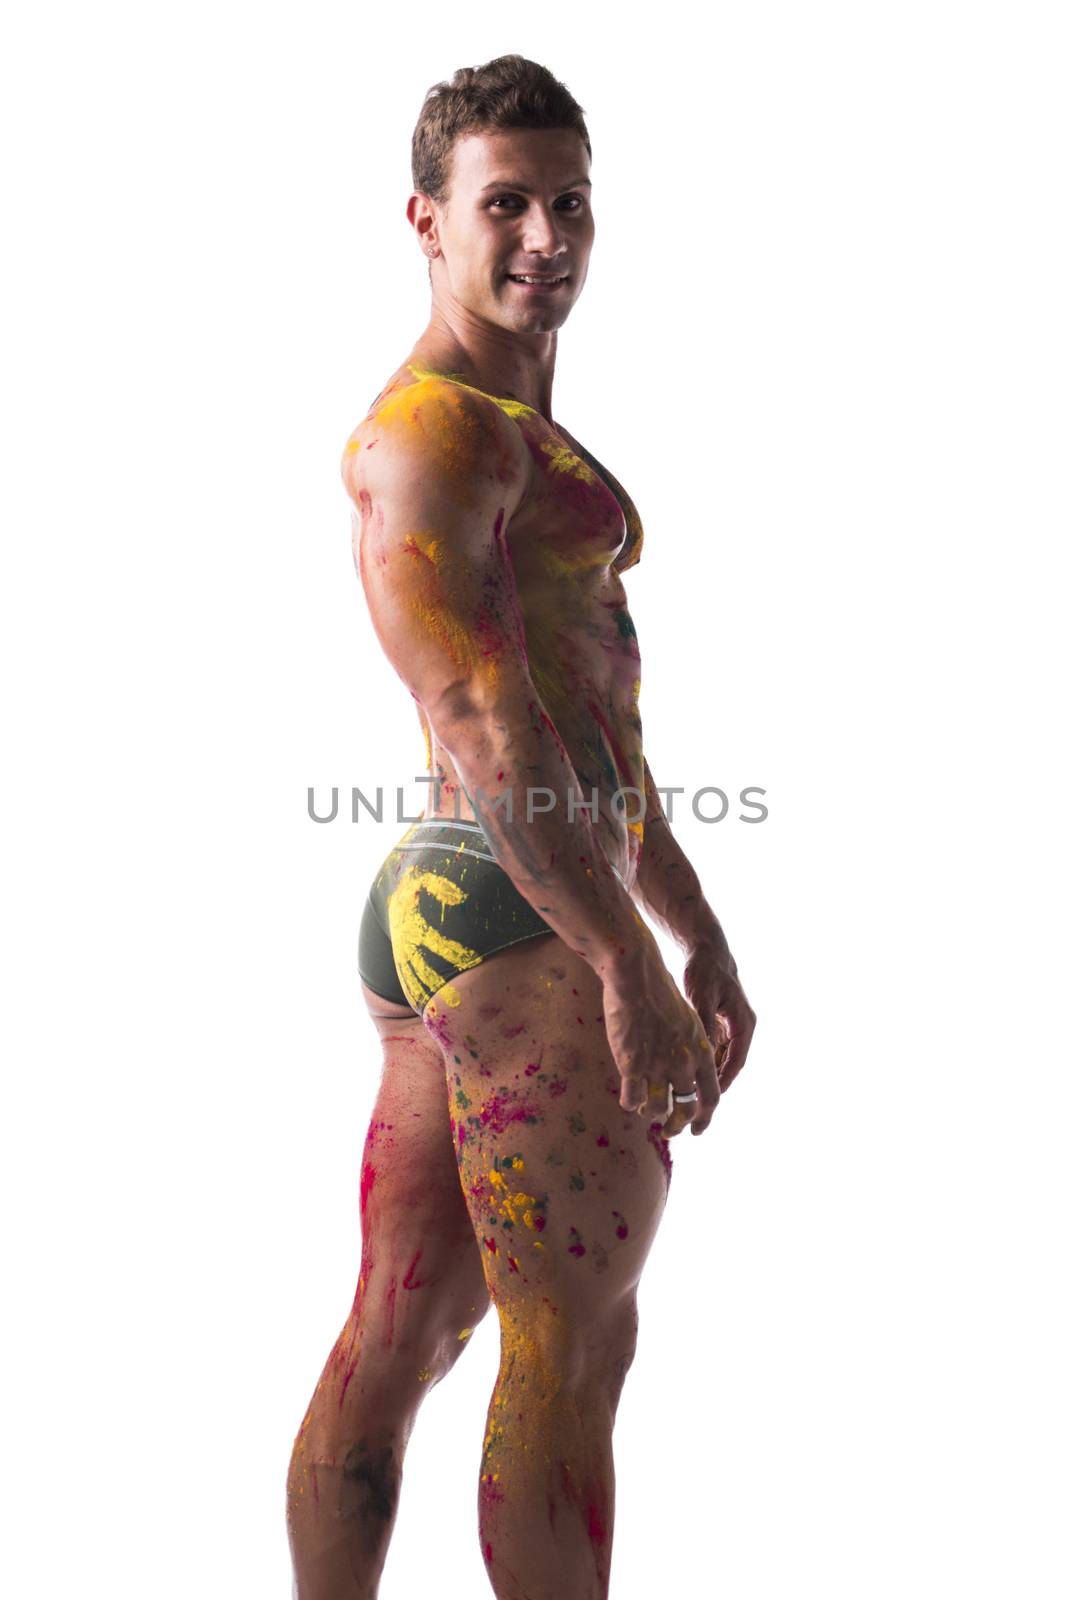 Muscular young man shirtless with skin painted with Holi colors by artofphoto